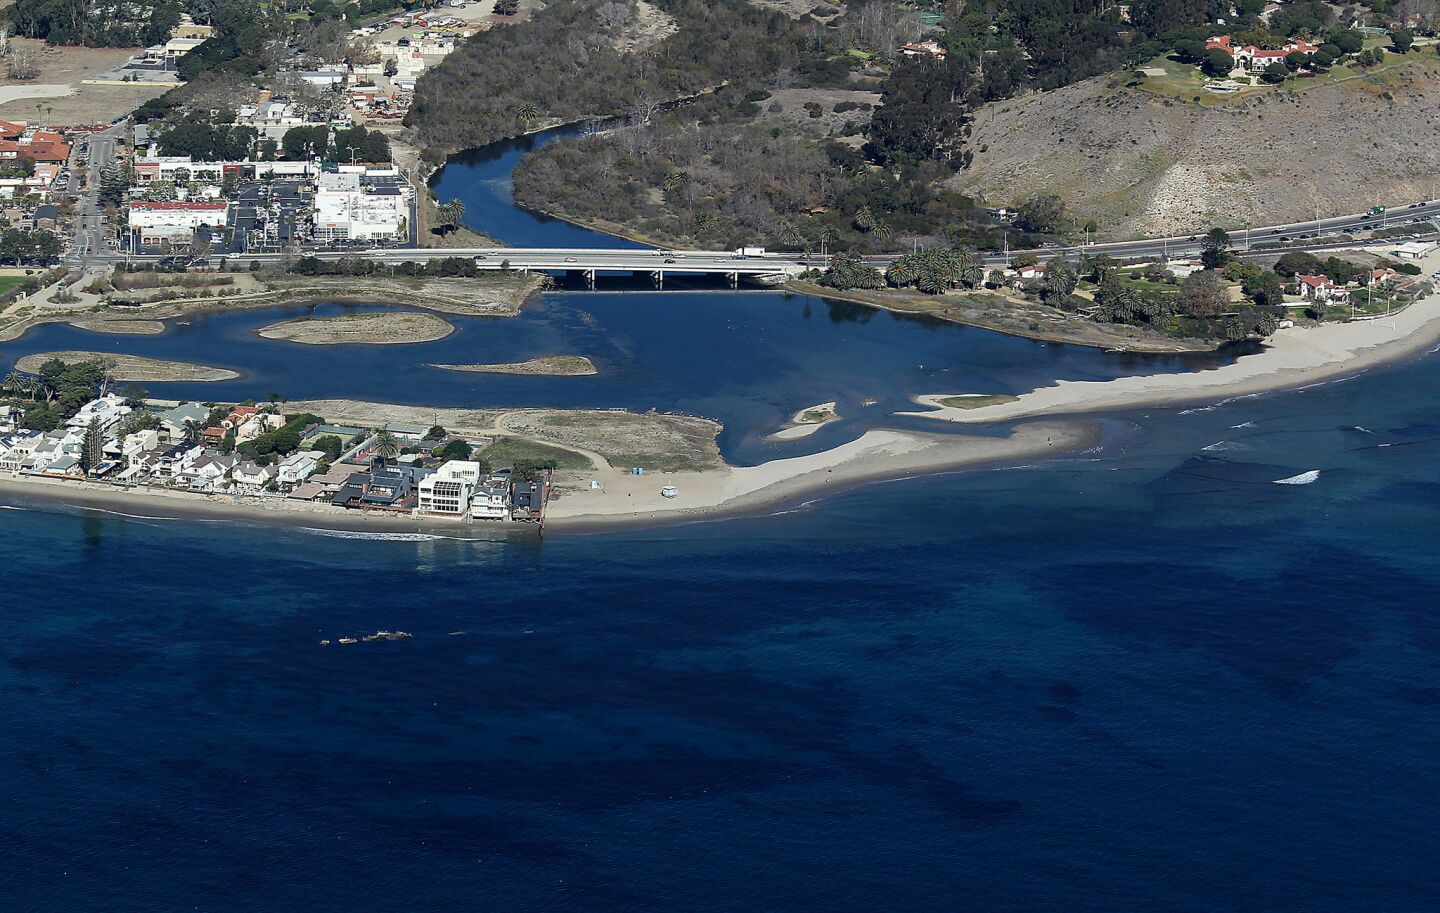 The coastal waters around Malibu Lagoon are included in the marine sanctuaries protected by the state.